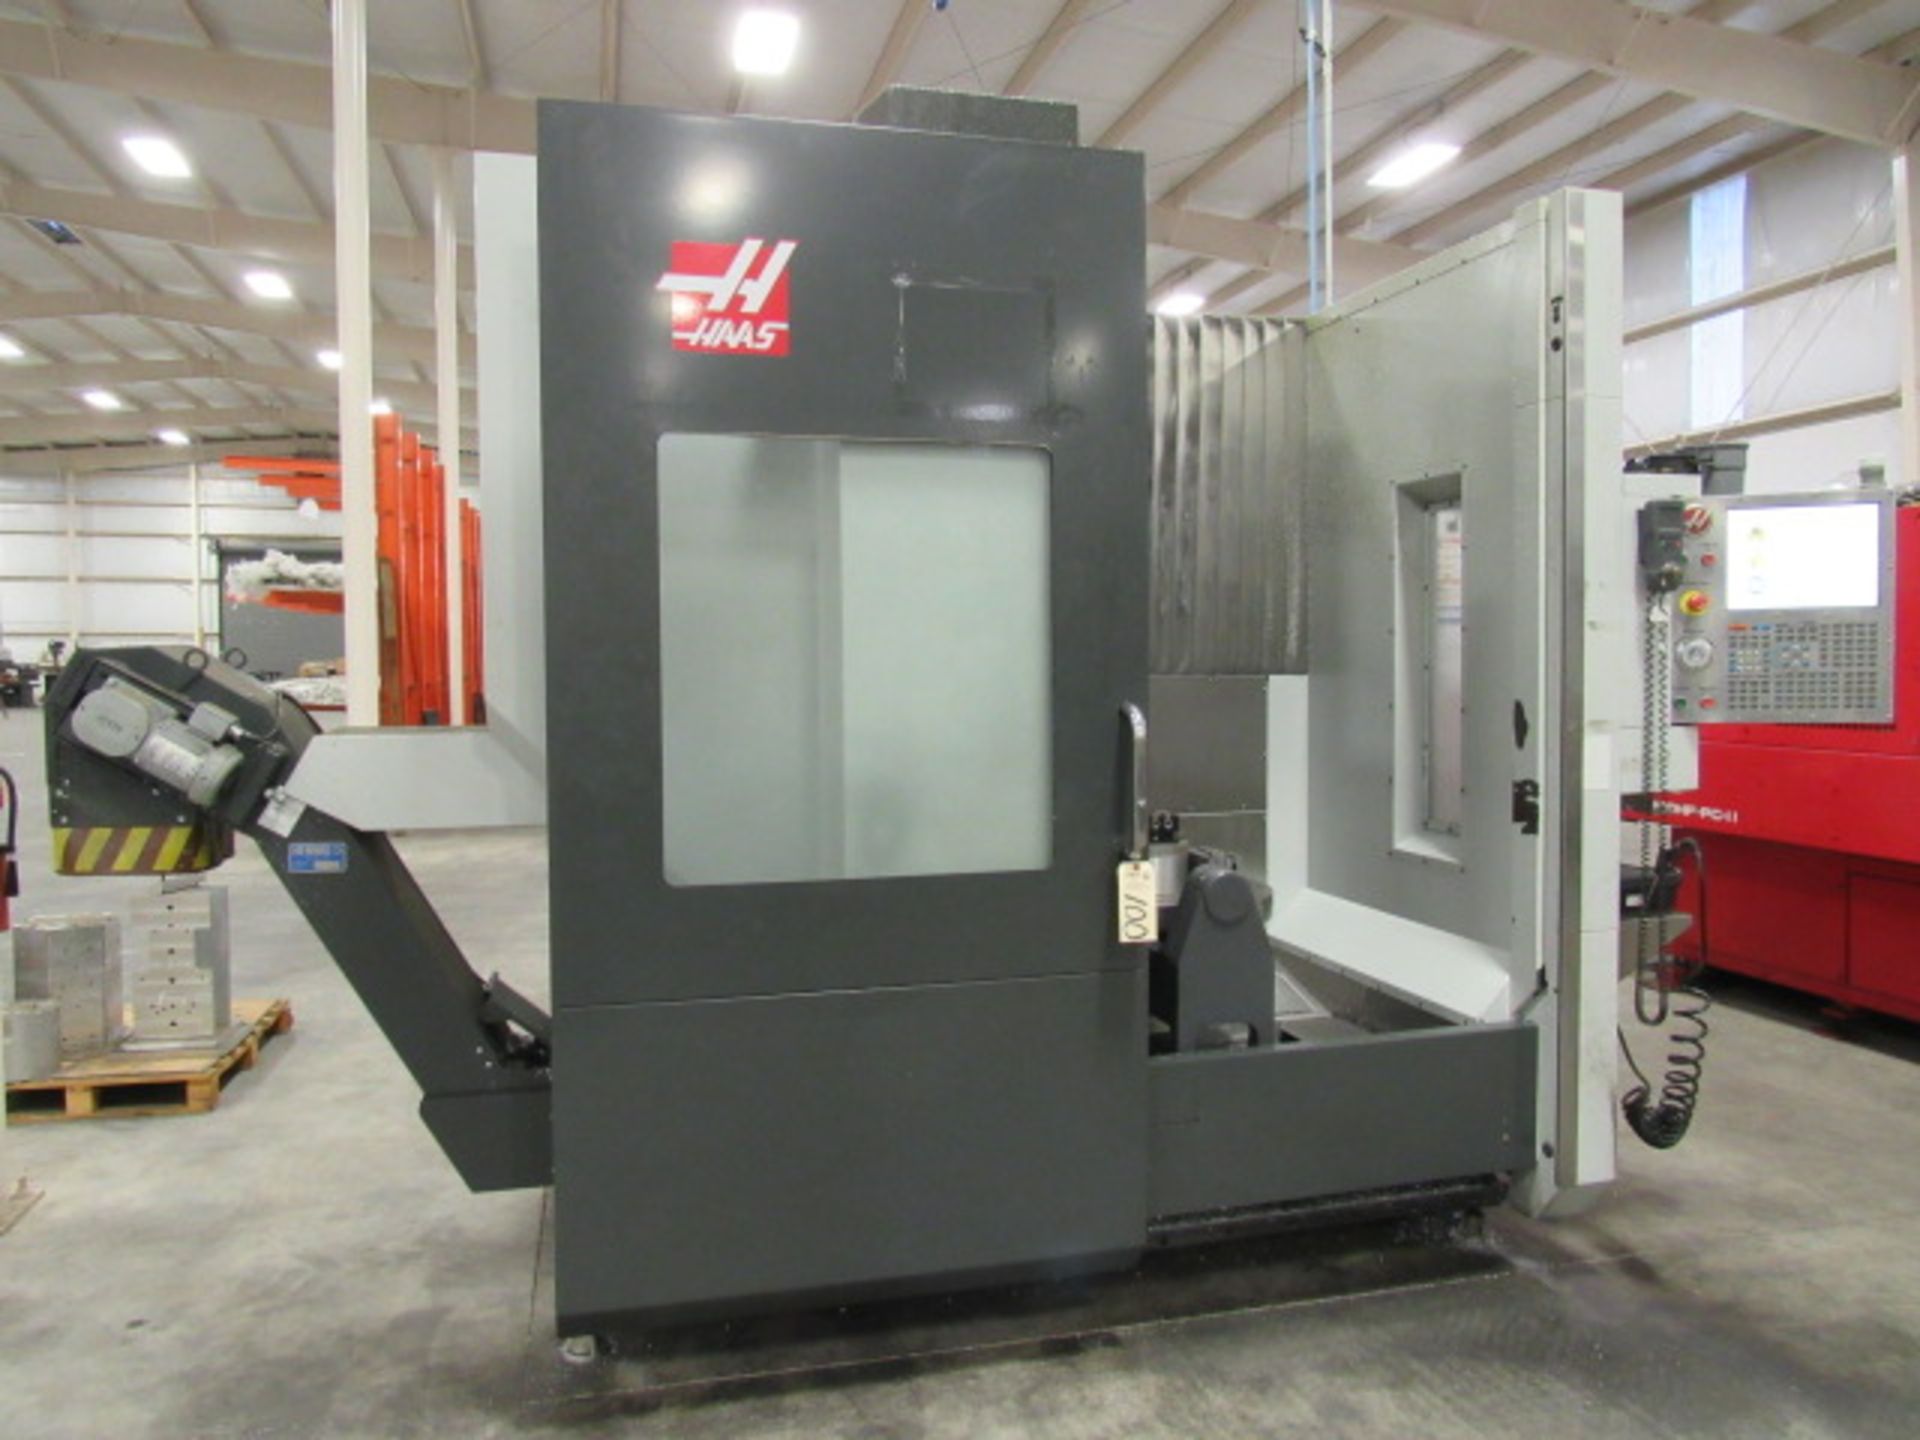 Haas UMC750 5-Axis CNC Vertical Machining Center with 19.7'' Diameter Rotary Trunnion Table, #40 - Image 2 of 6